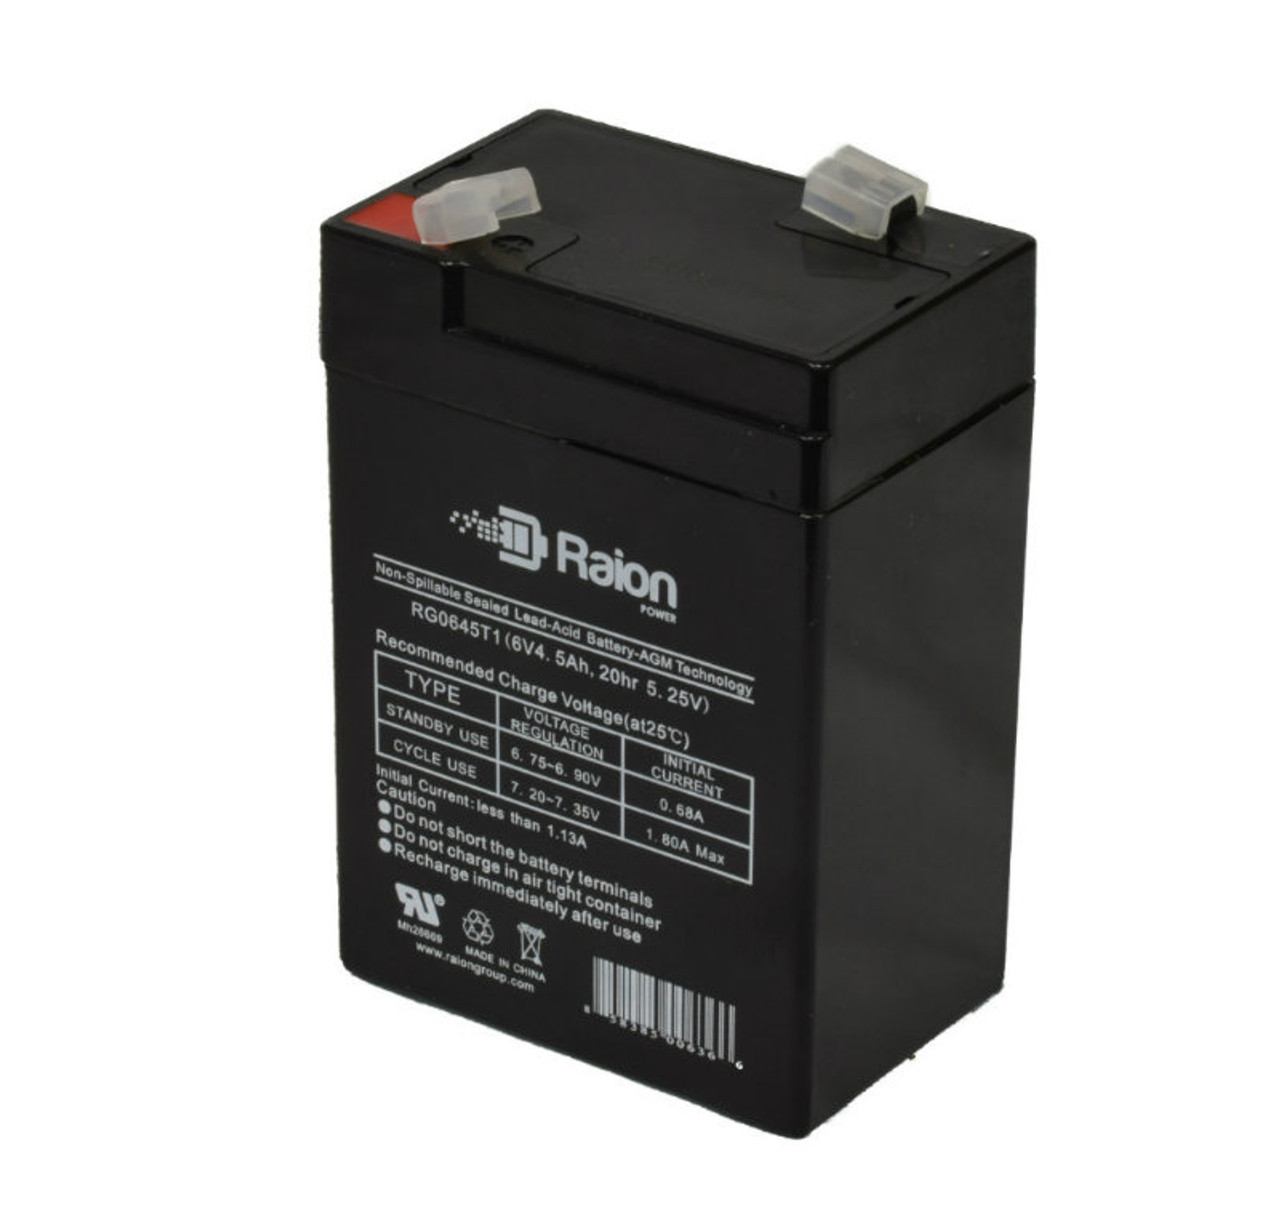 Raion Power RG0645T1 6V 4.5Ah Replacement Battery Cartridge for Century PS640